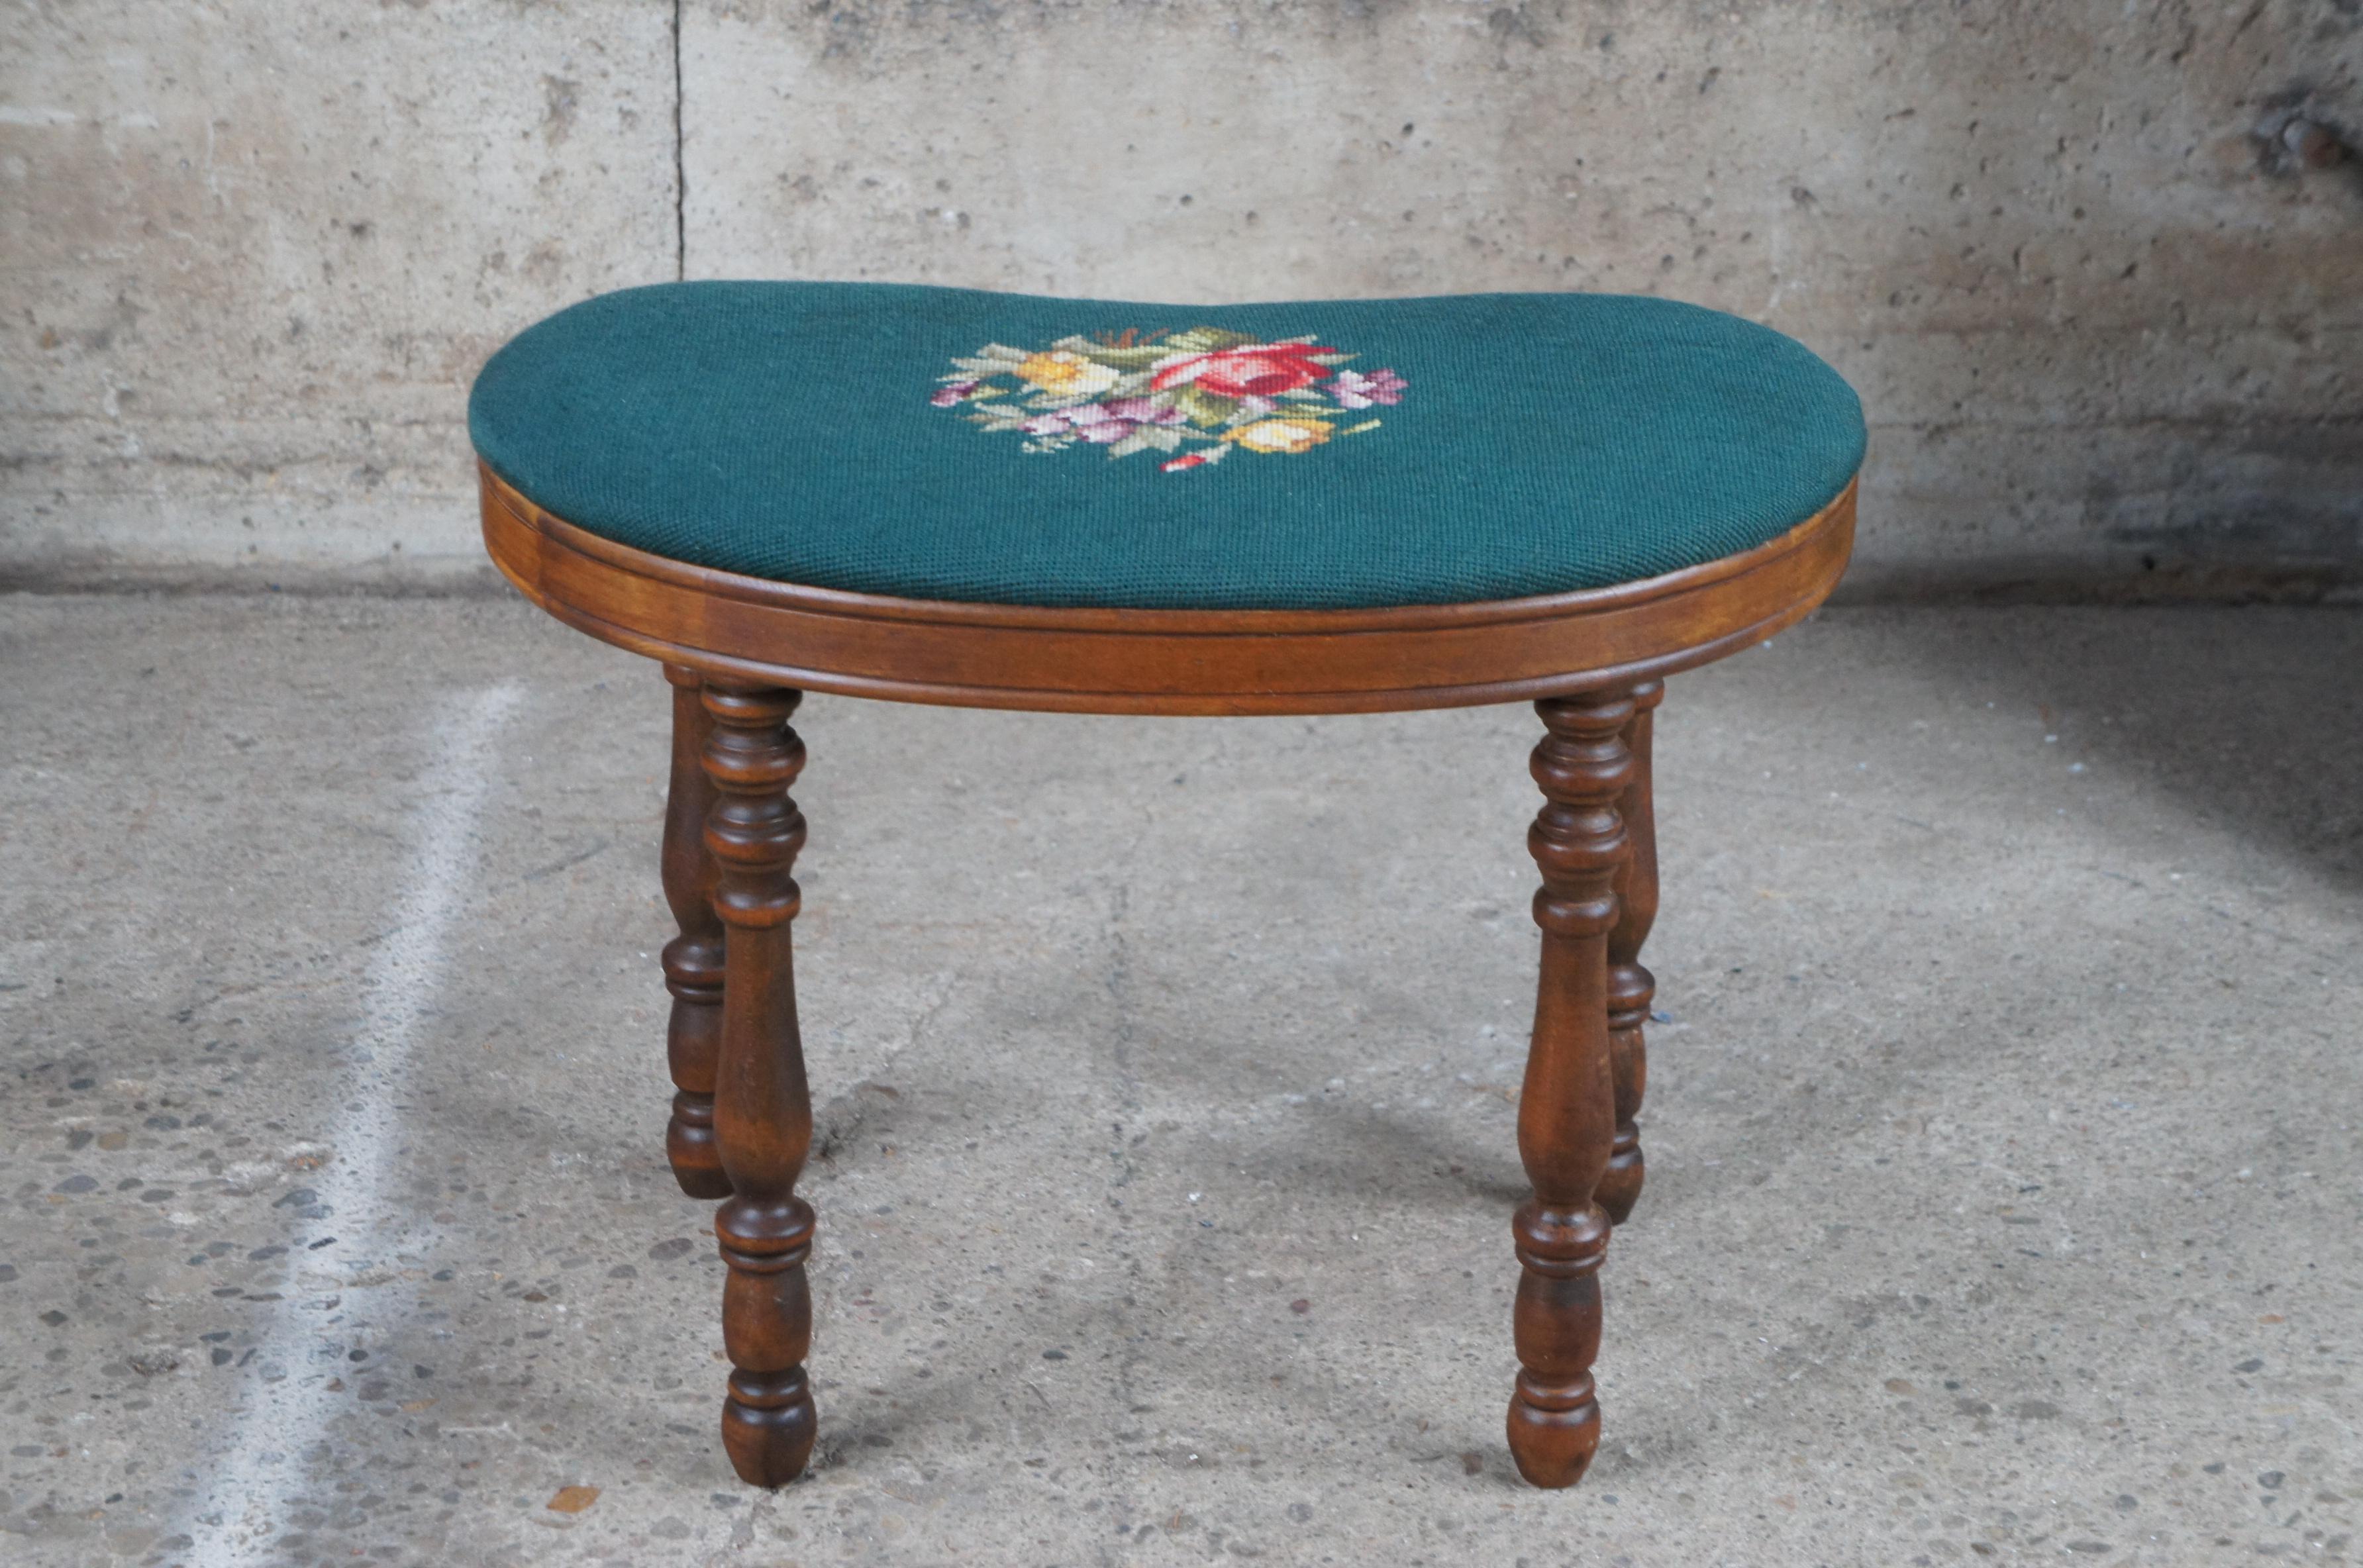 Mid Century Kidney Bean Green Floral Embroidered Foot Stool Piano Bench Ottoman In Good Condition For Sale In Dayton, OH